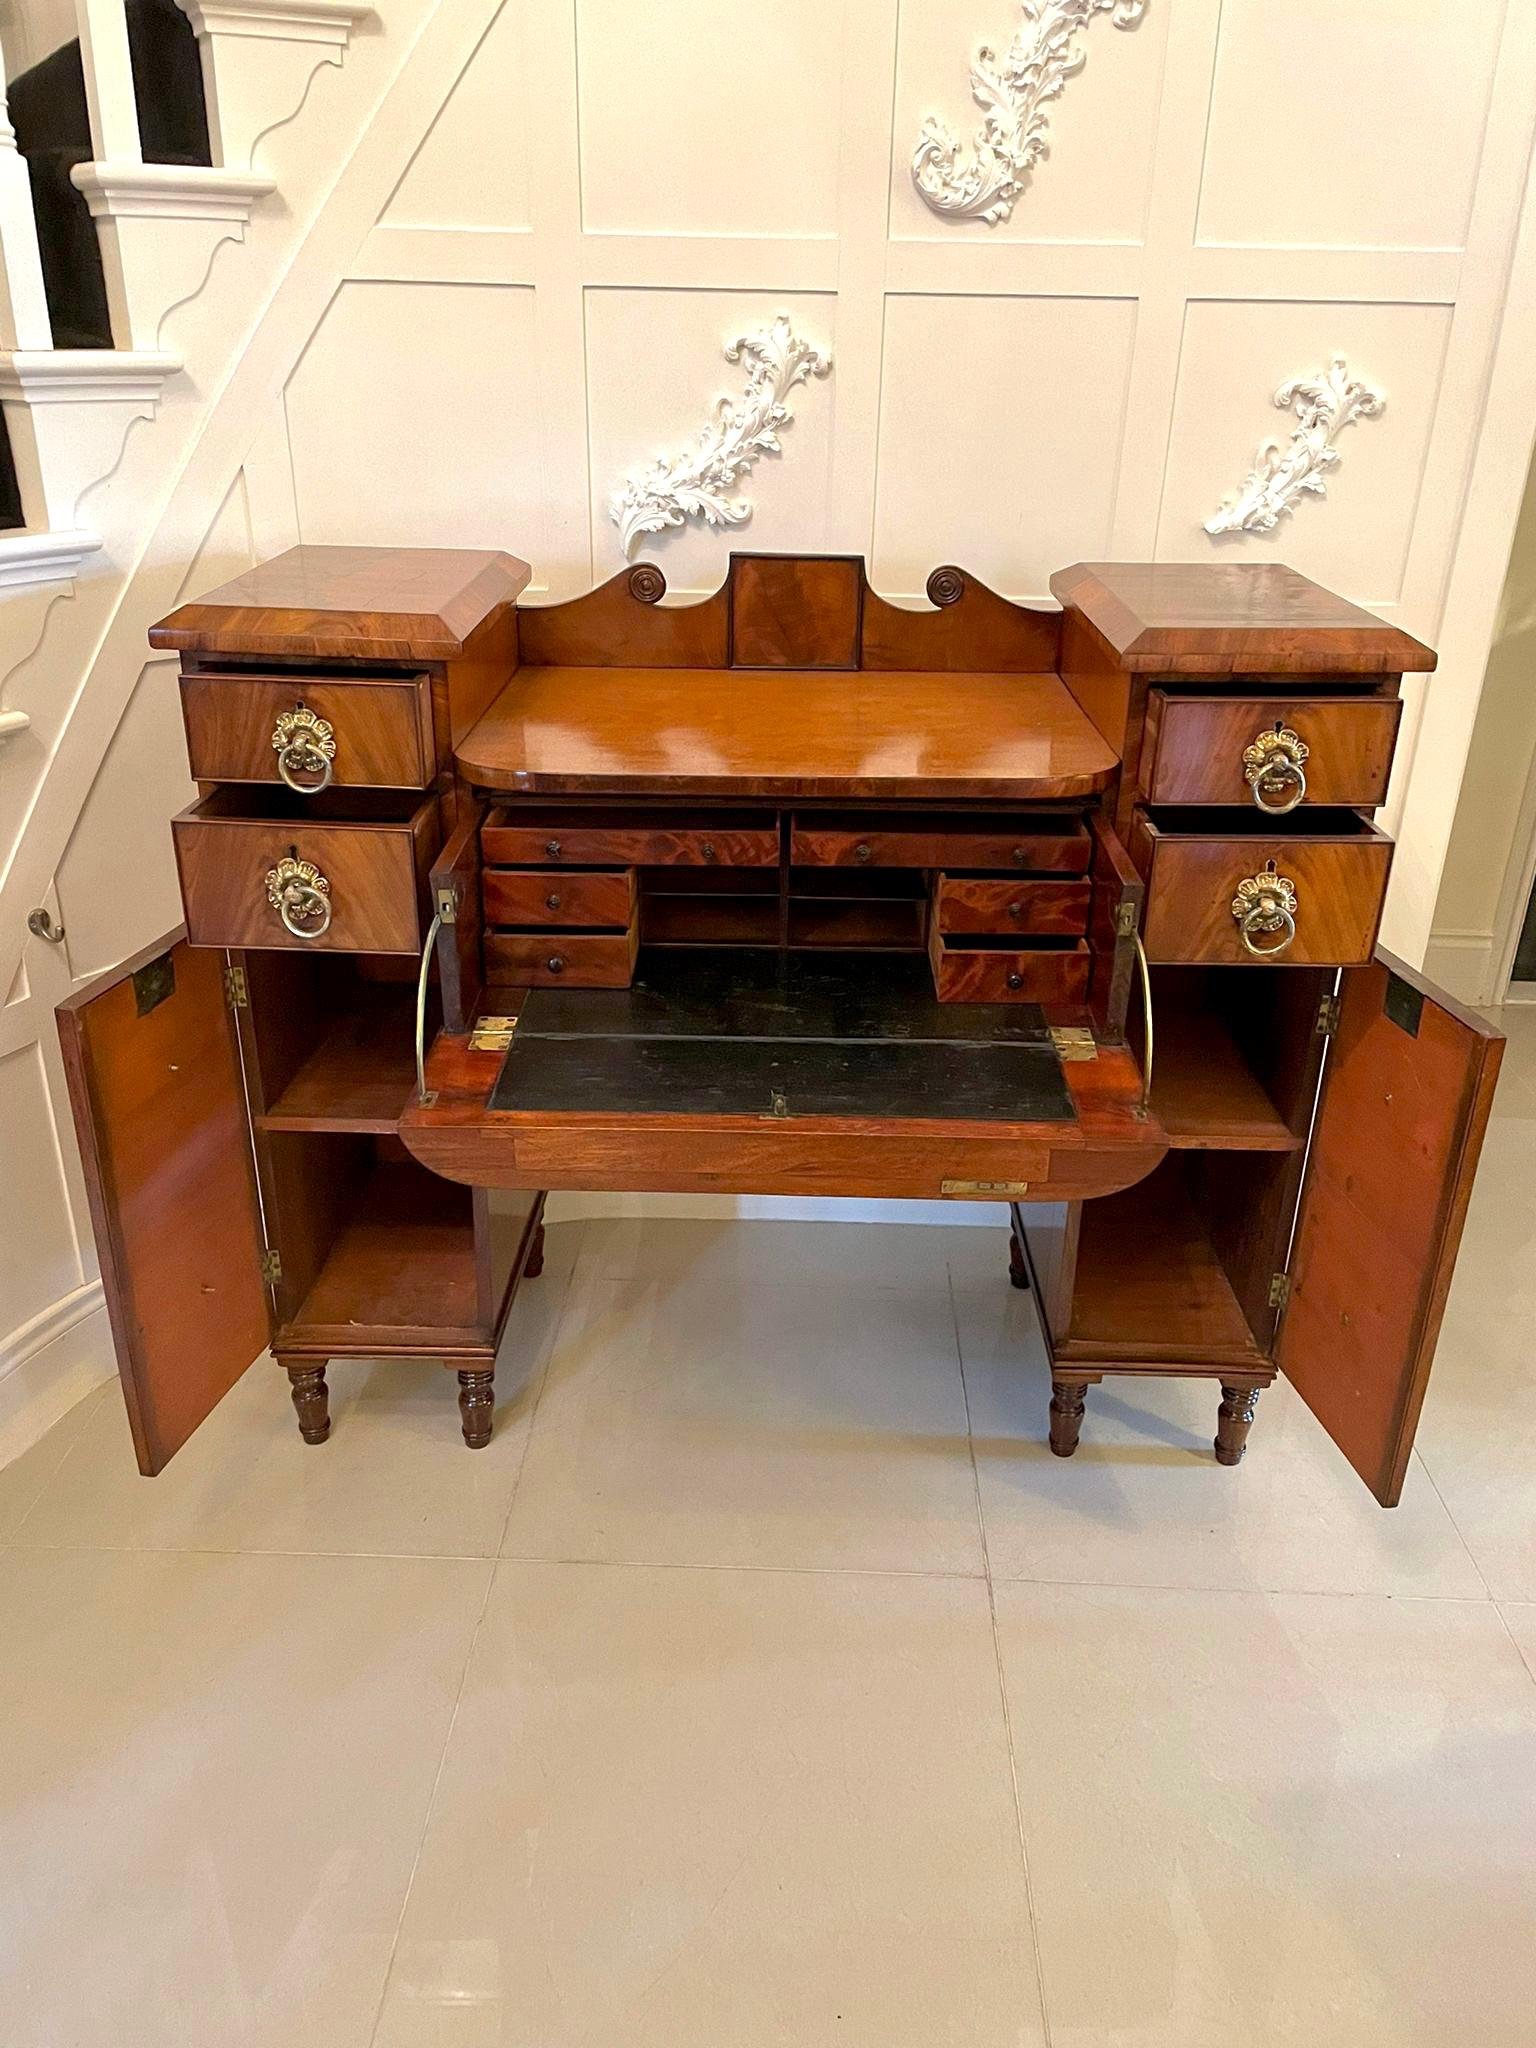 Rare Antique Regency Quality Mahogany Secretaire Sideboard For Sale 1